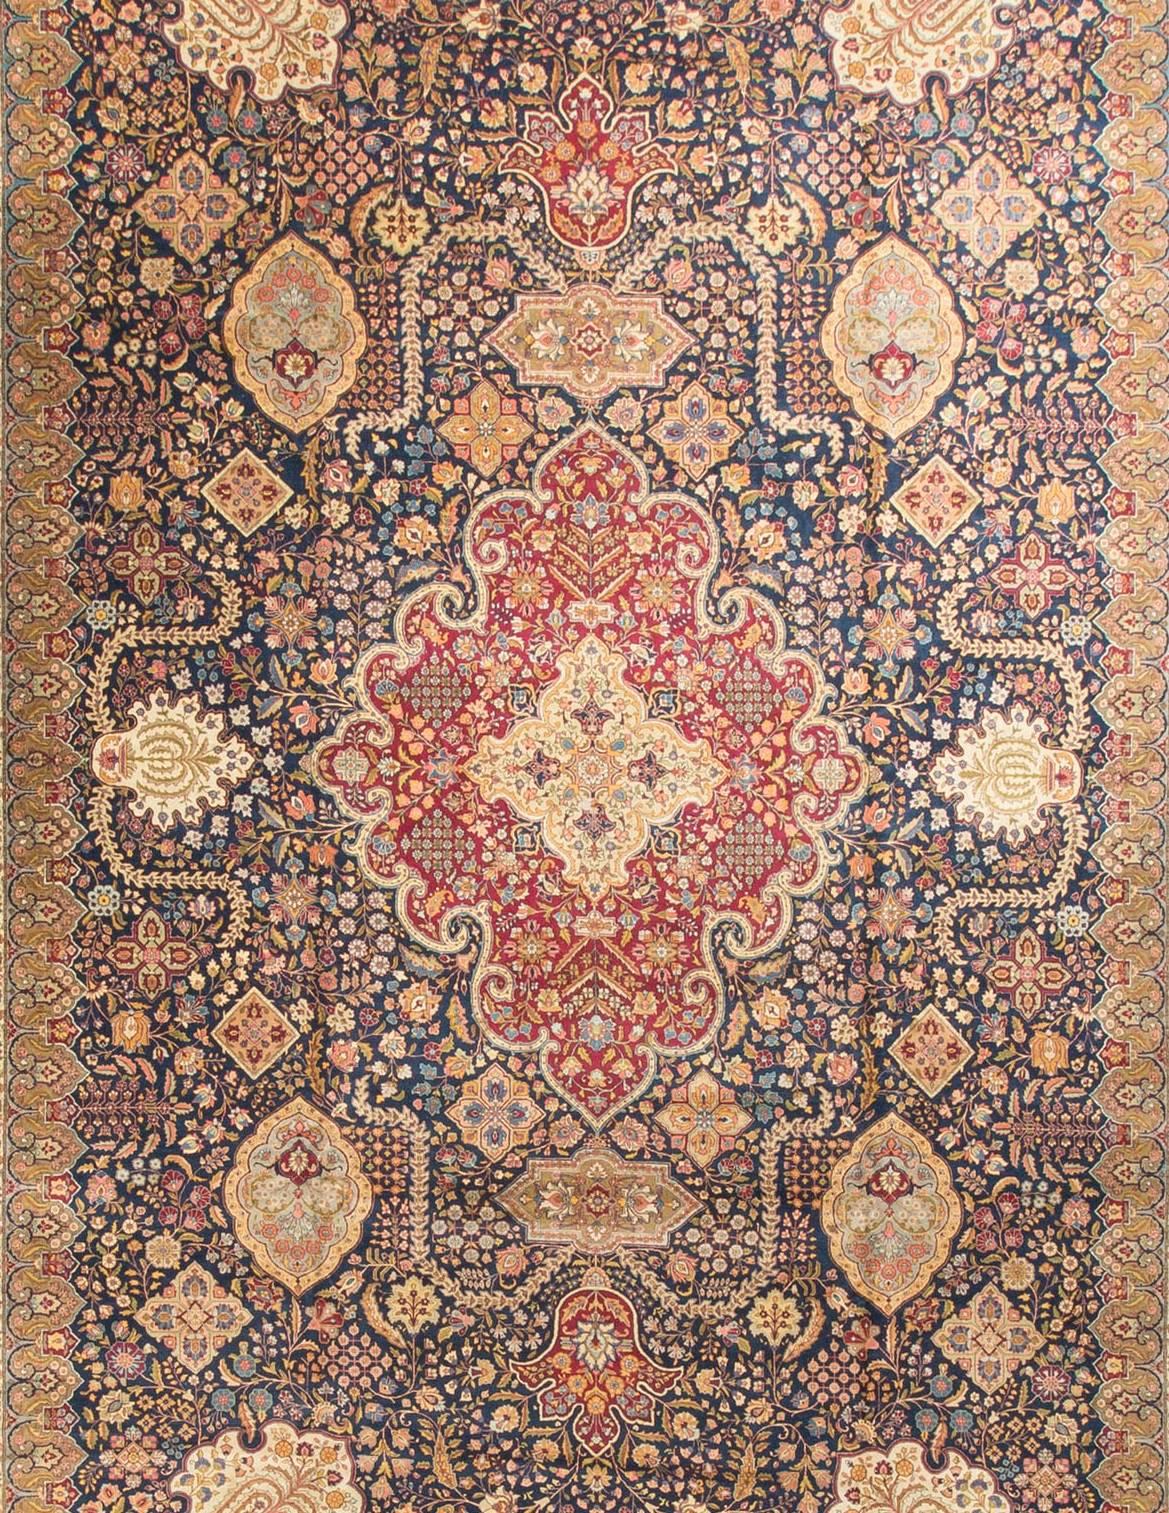 A central medallion surrounded by a field filled to overflowing with floral elements on a dark blue ground the details of which show the skill of both the designer and master weaver. The main border in red surrounded by two guard borders in ivory